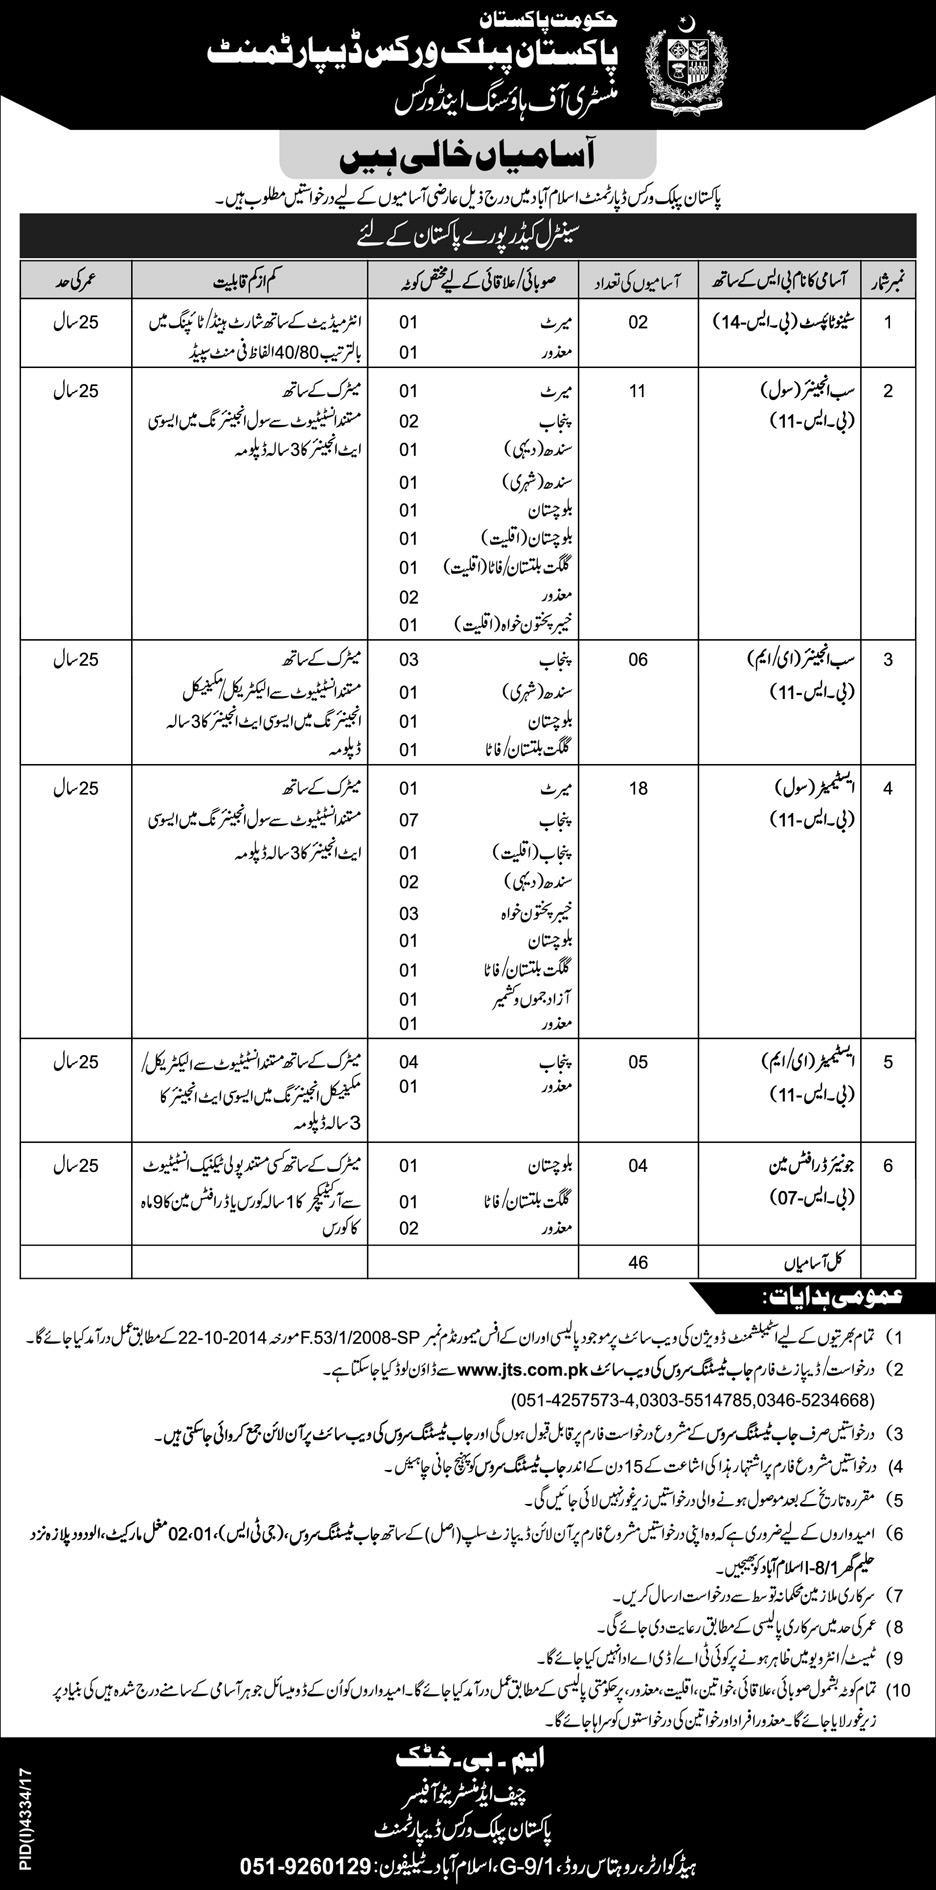 Public Works Department Government of Pakistan 46 Jobs, 11 February 2018, Daily Express Newspaper